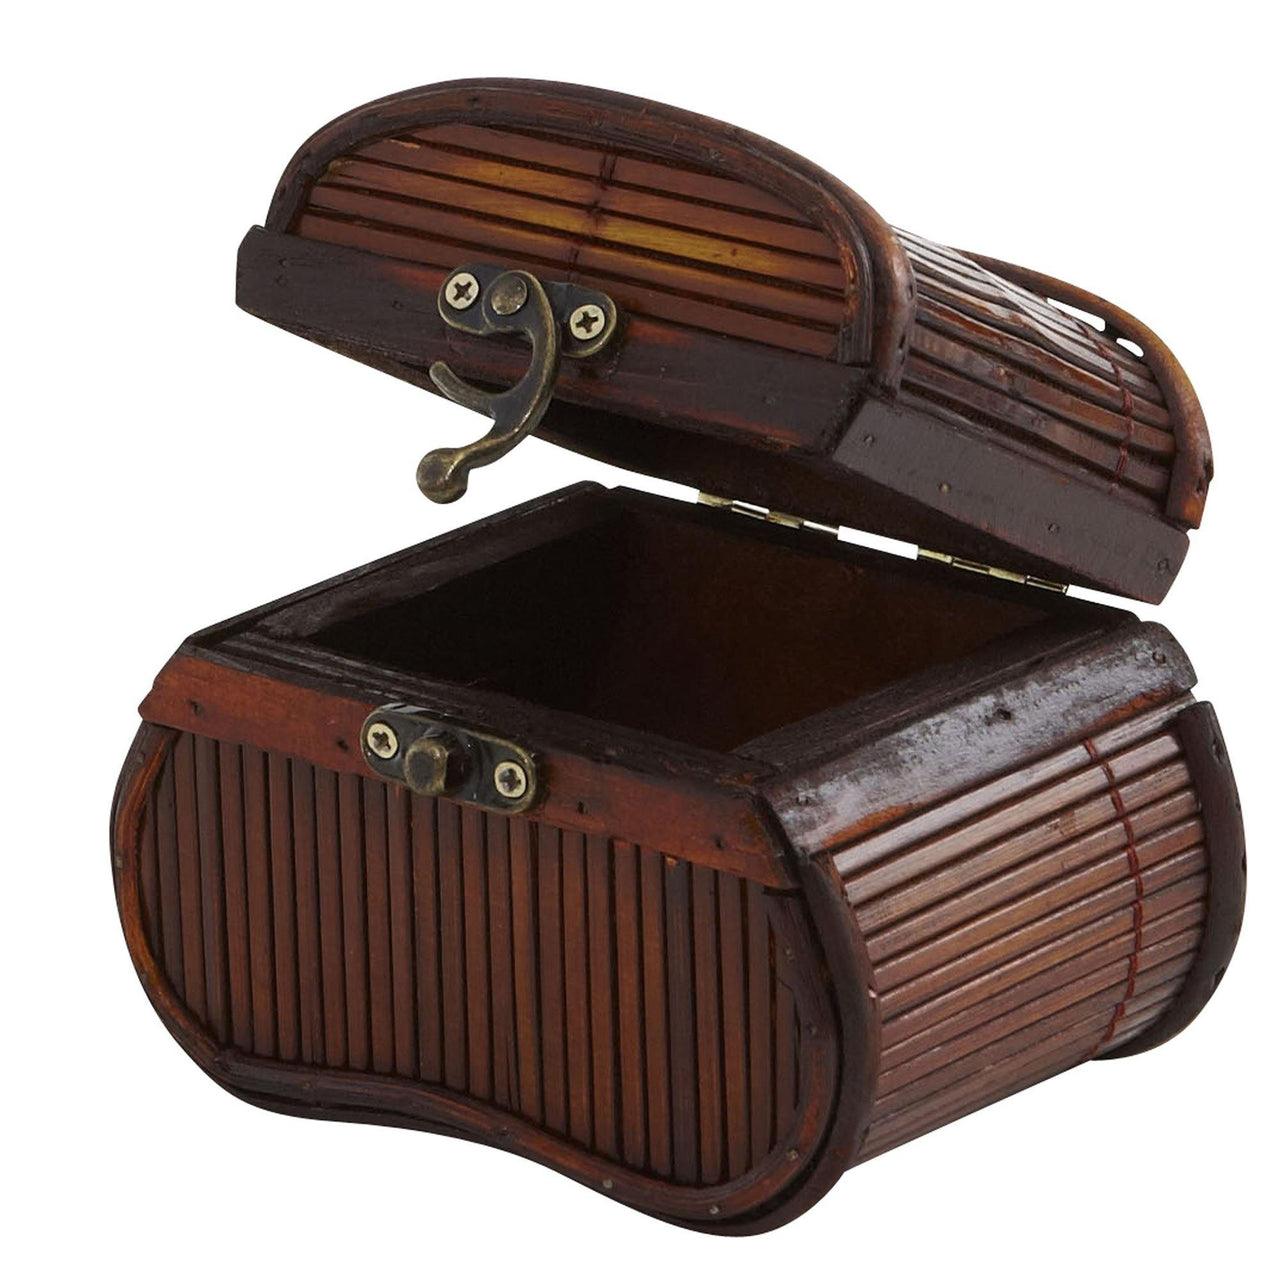 Bamboo Chests (Set of 3) - The Fox Decor